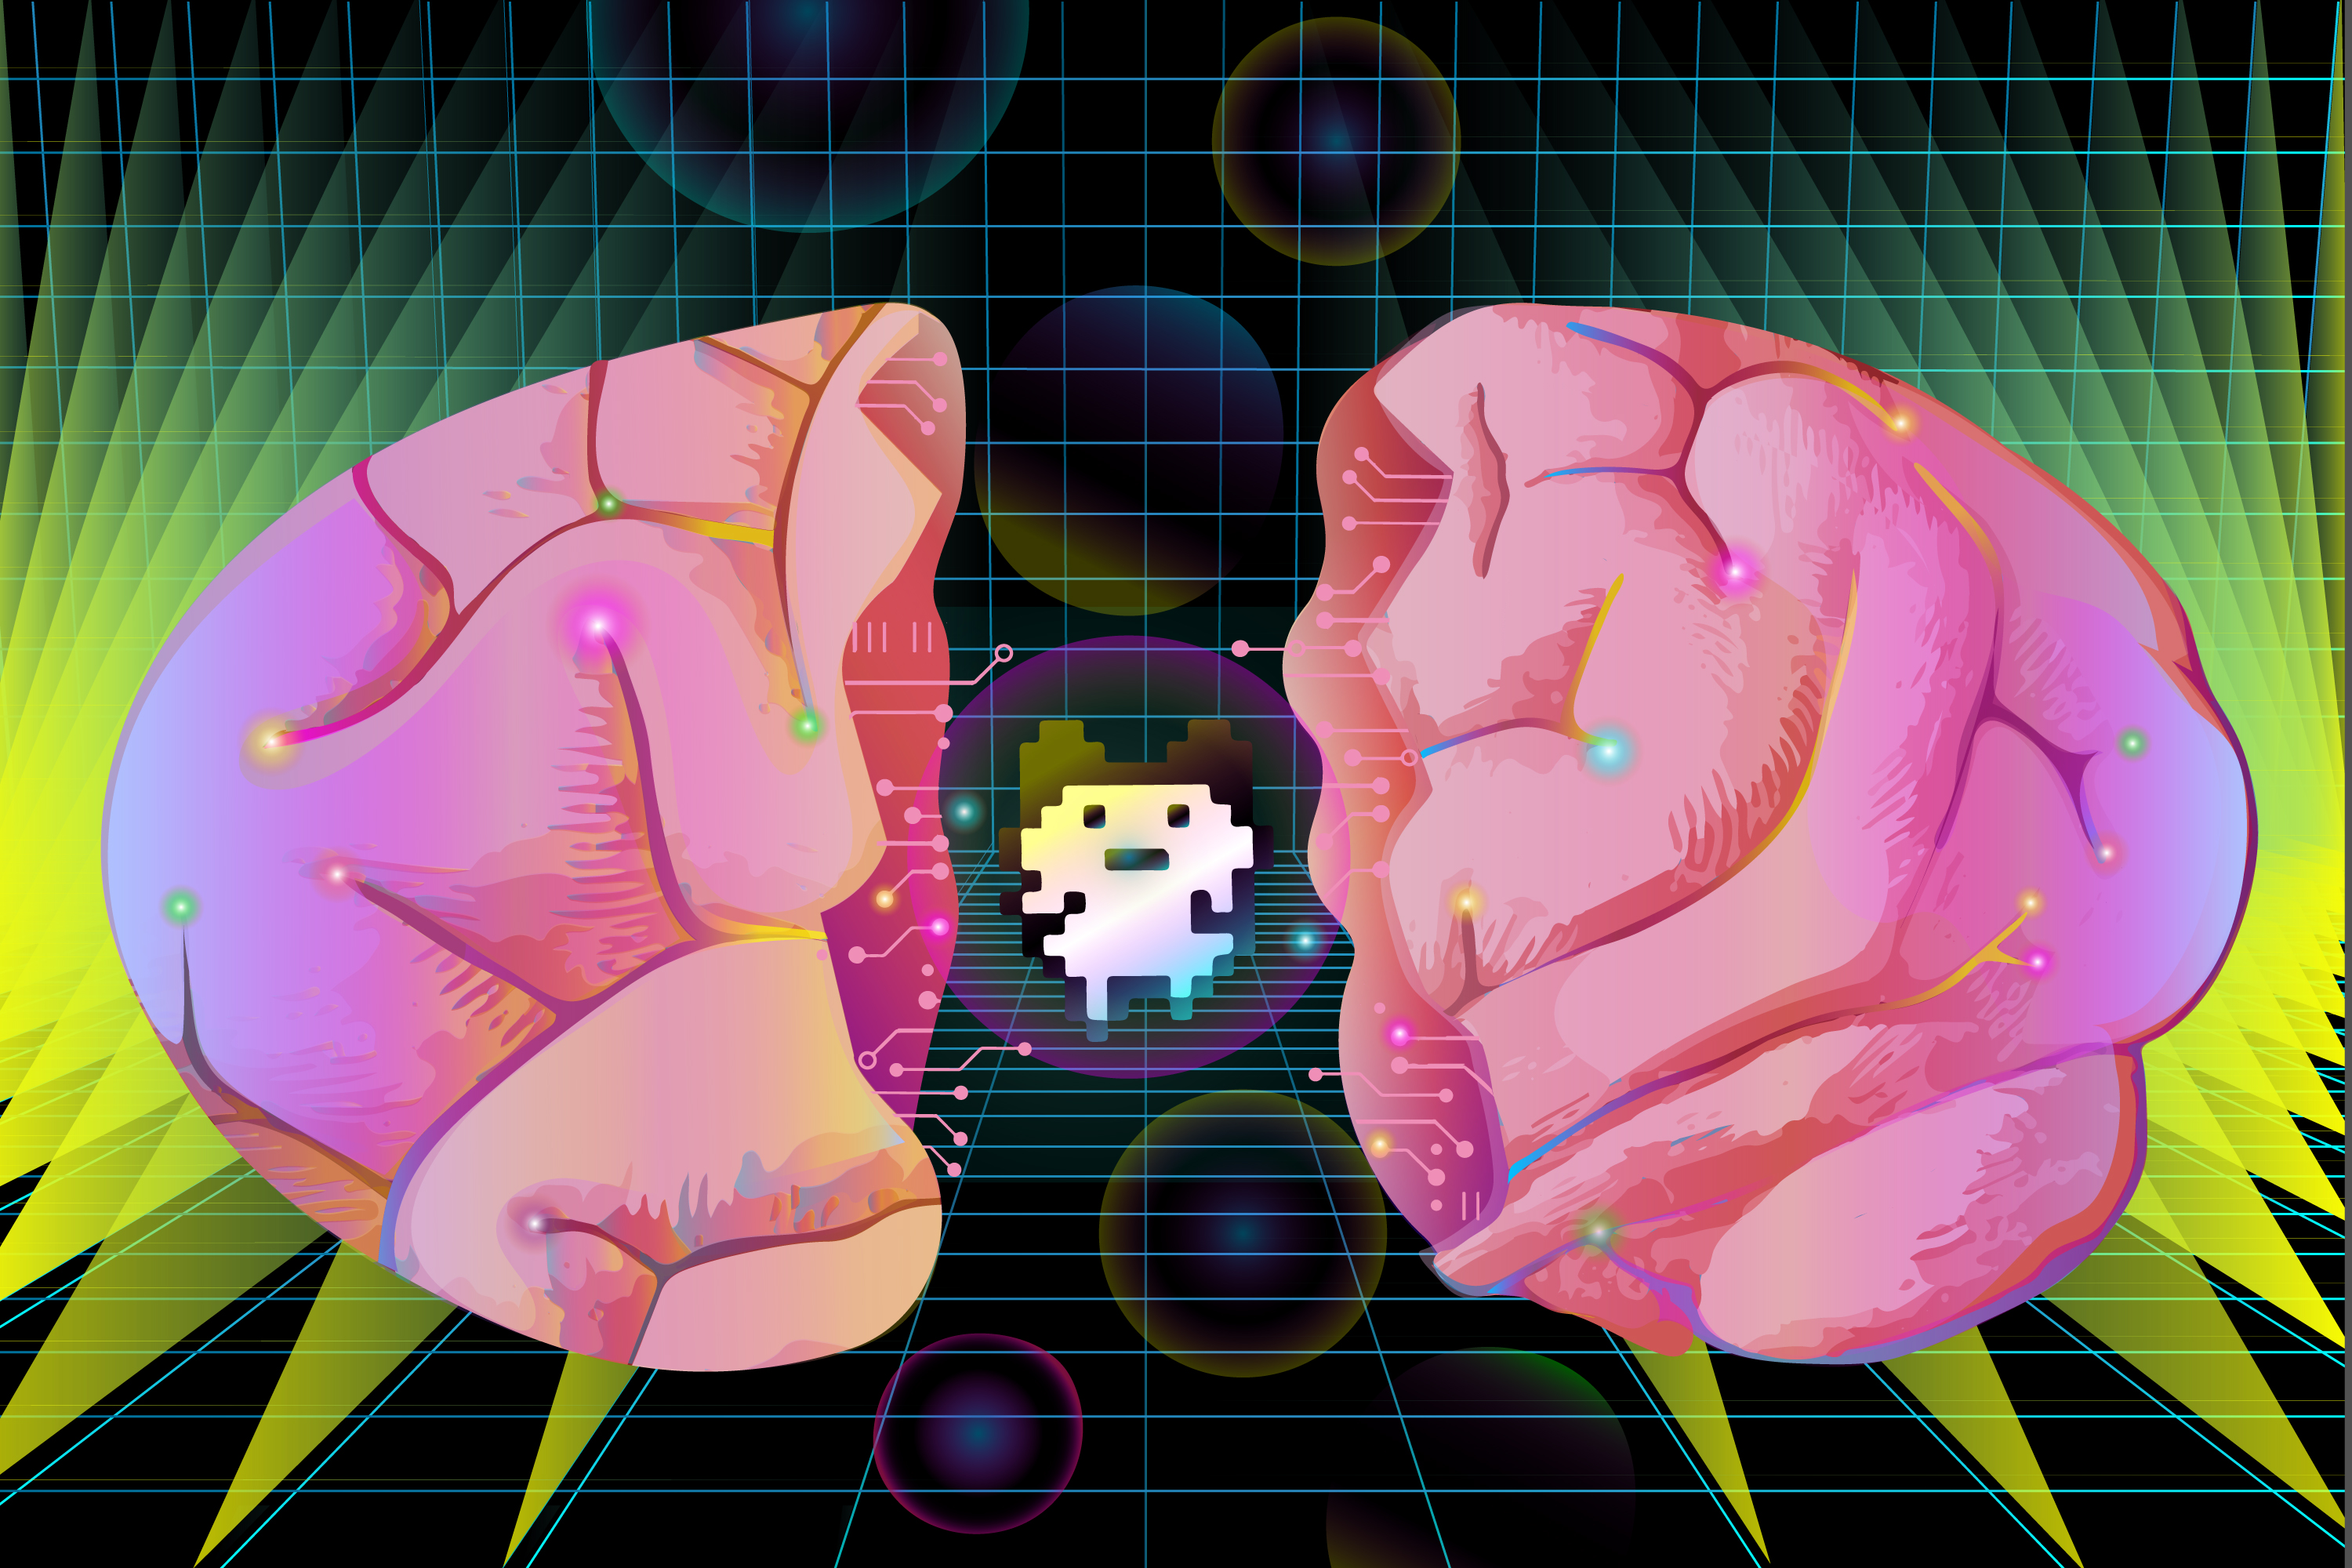 An illustration of two halves of a pink brain with a small Tamagotchi character in the middle.